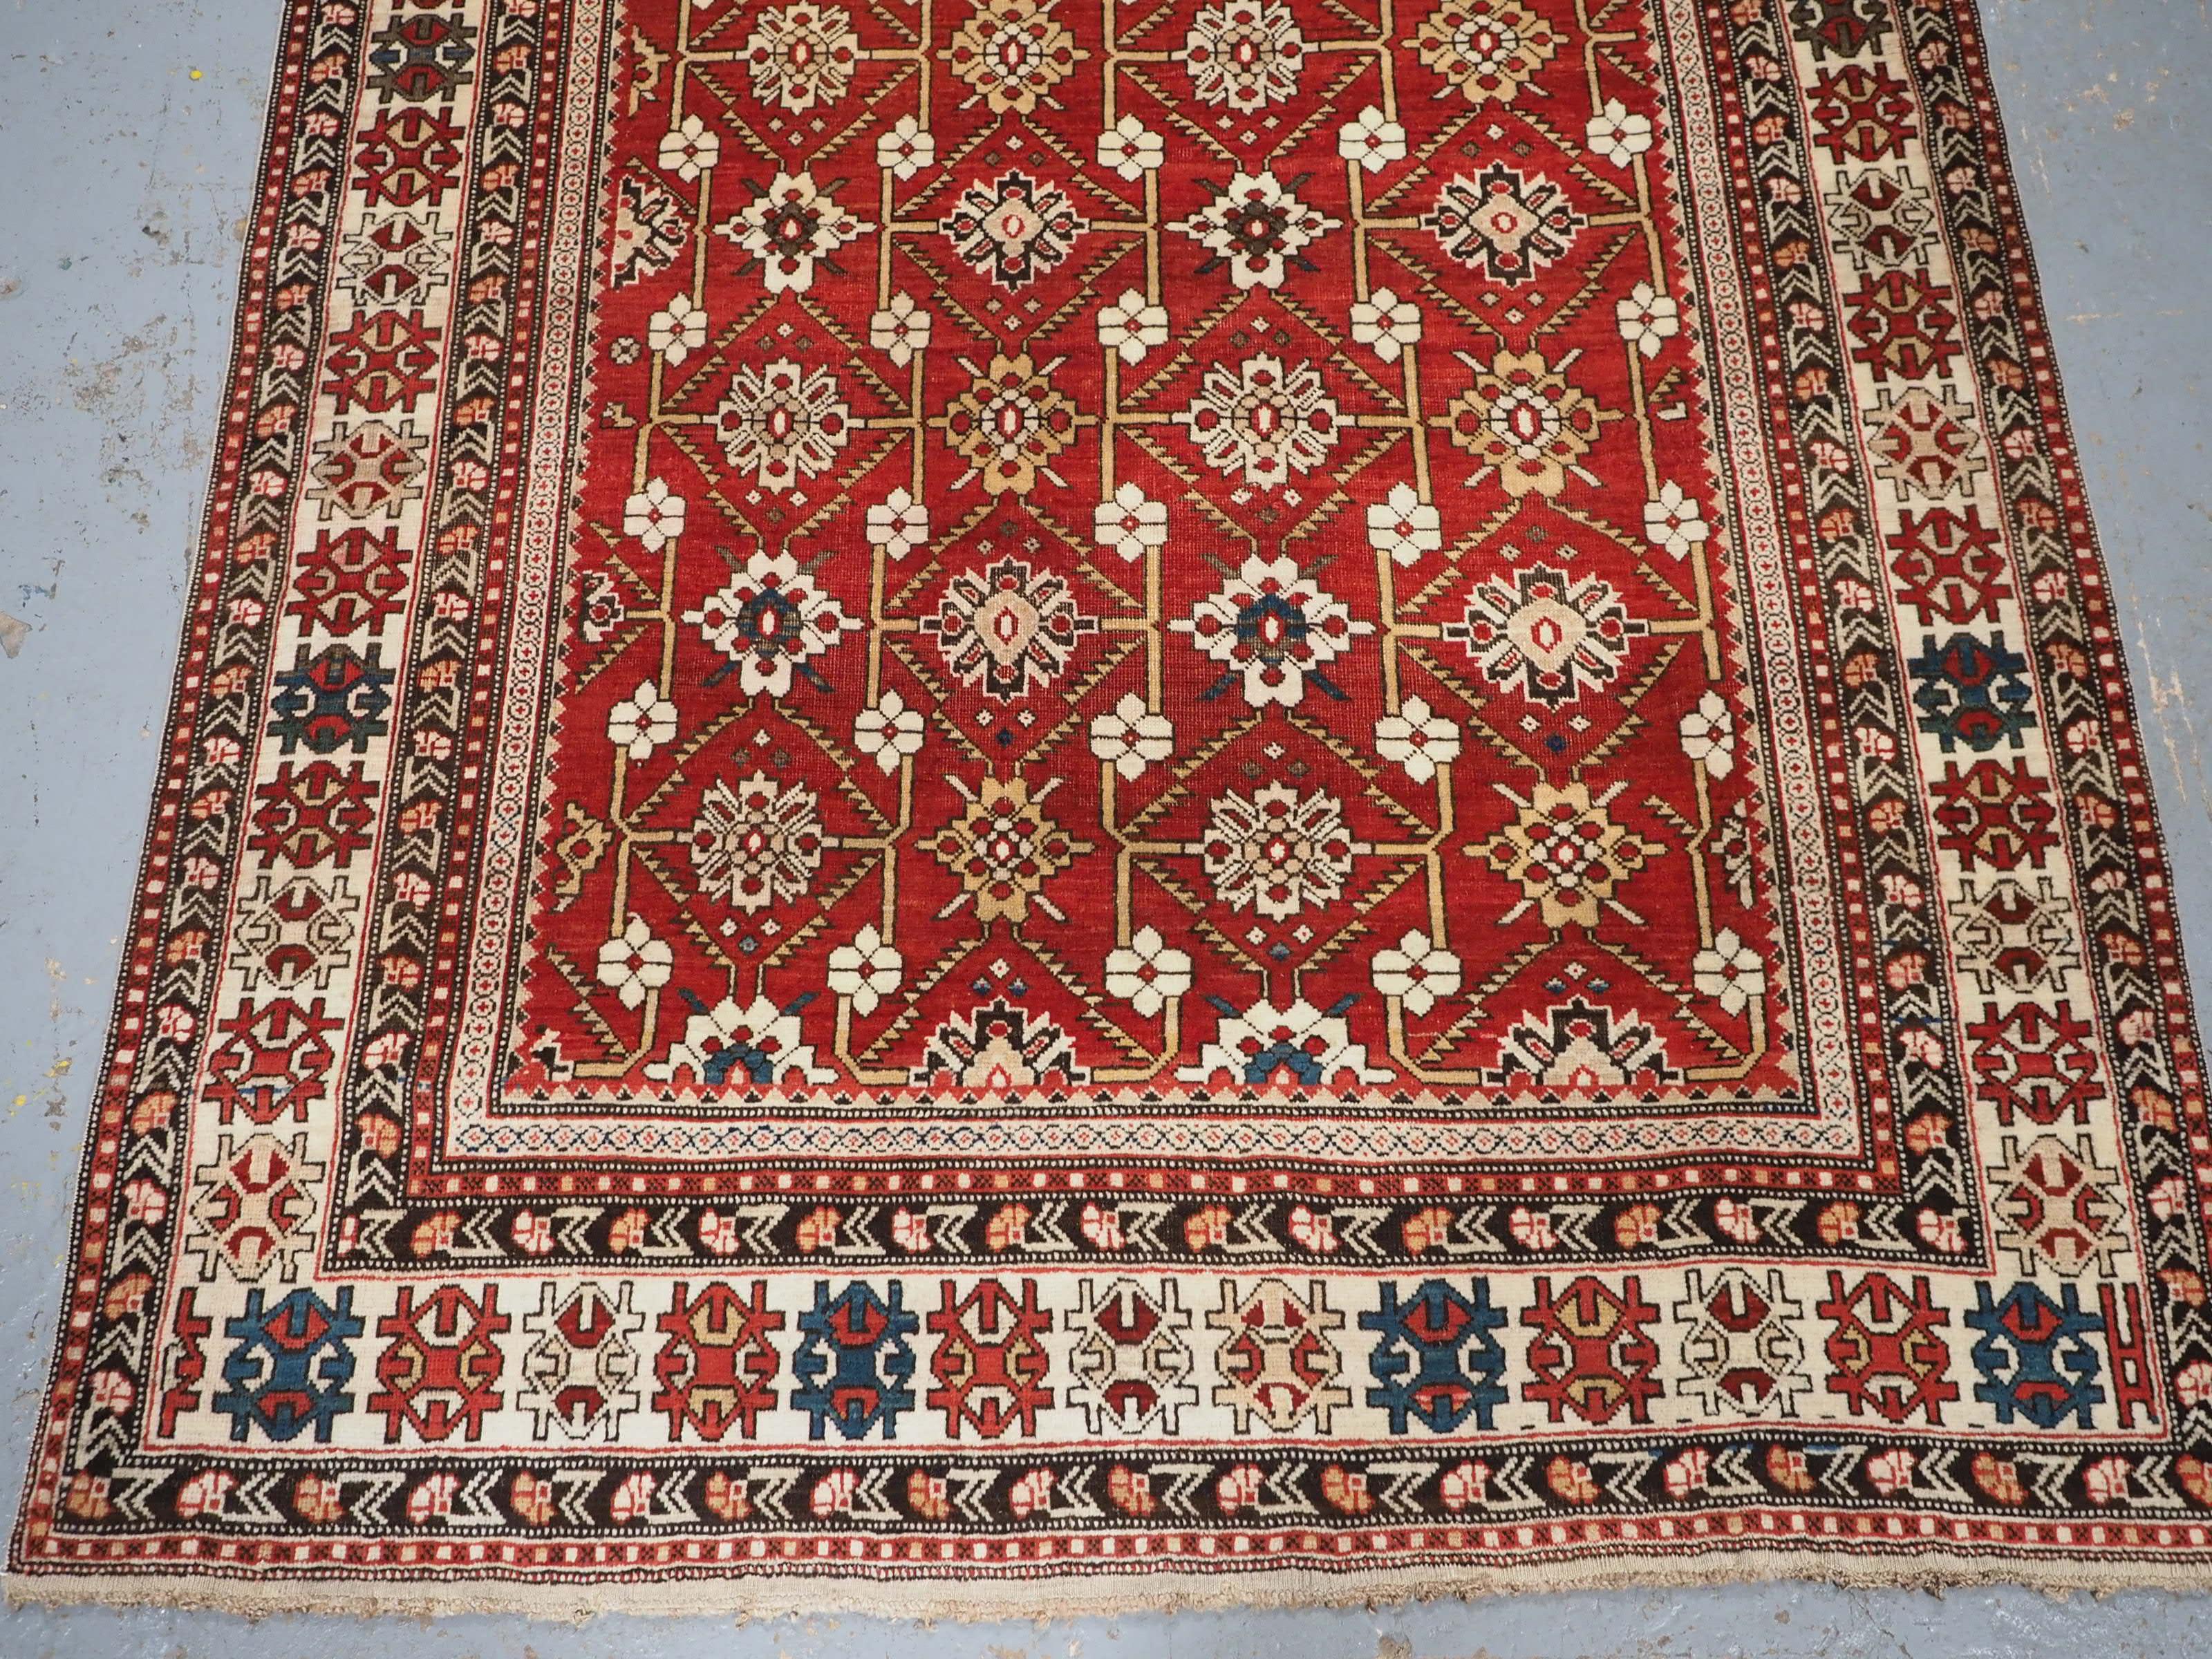 Early 20th Century Antique South East Caucasian Shirvan rug with bold floral lattice design. For Sale